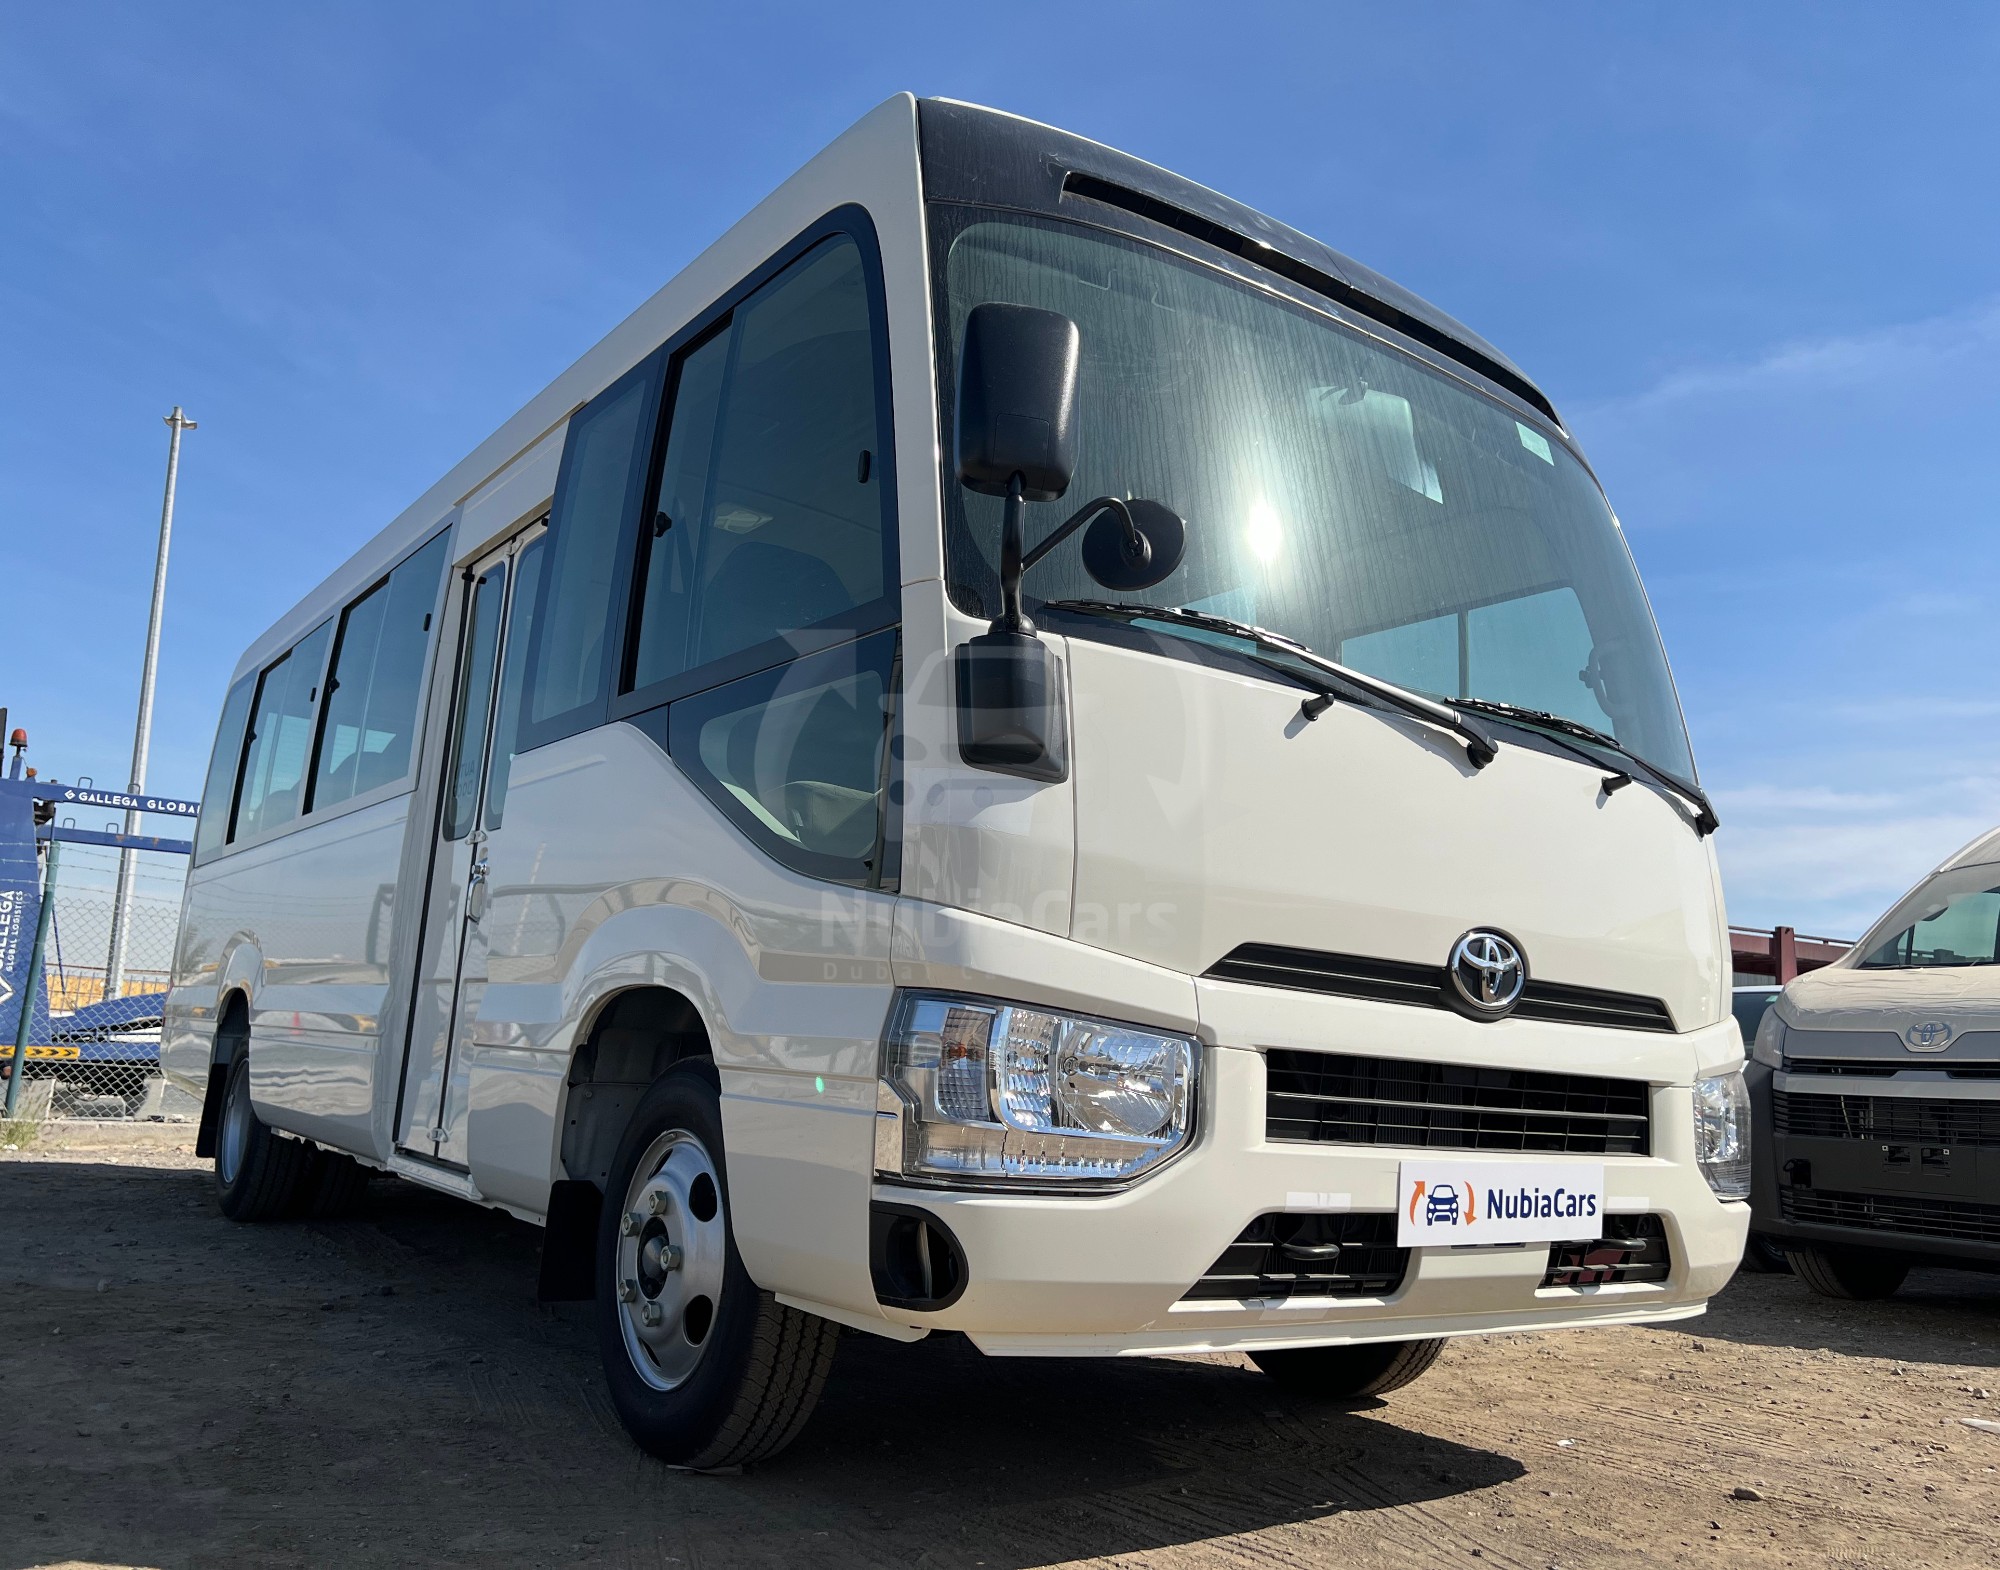 Toyota COSTER-MIN BUS The Toyota Coaster: A dependable, spacious minibus, designed for comfortable group travel with safety as a priority. - Rent Car Rwanda